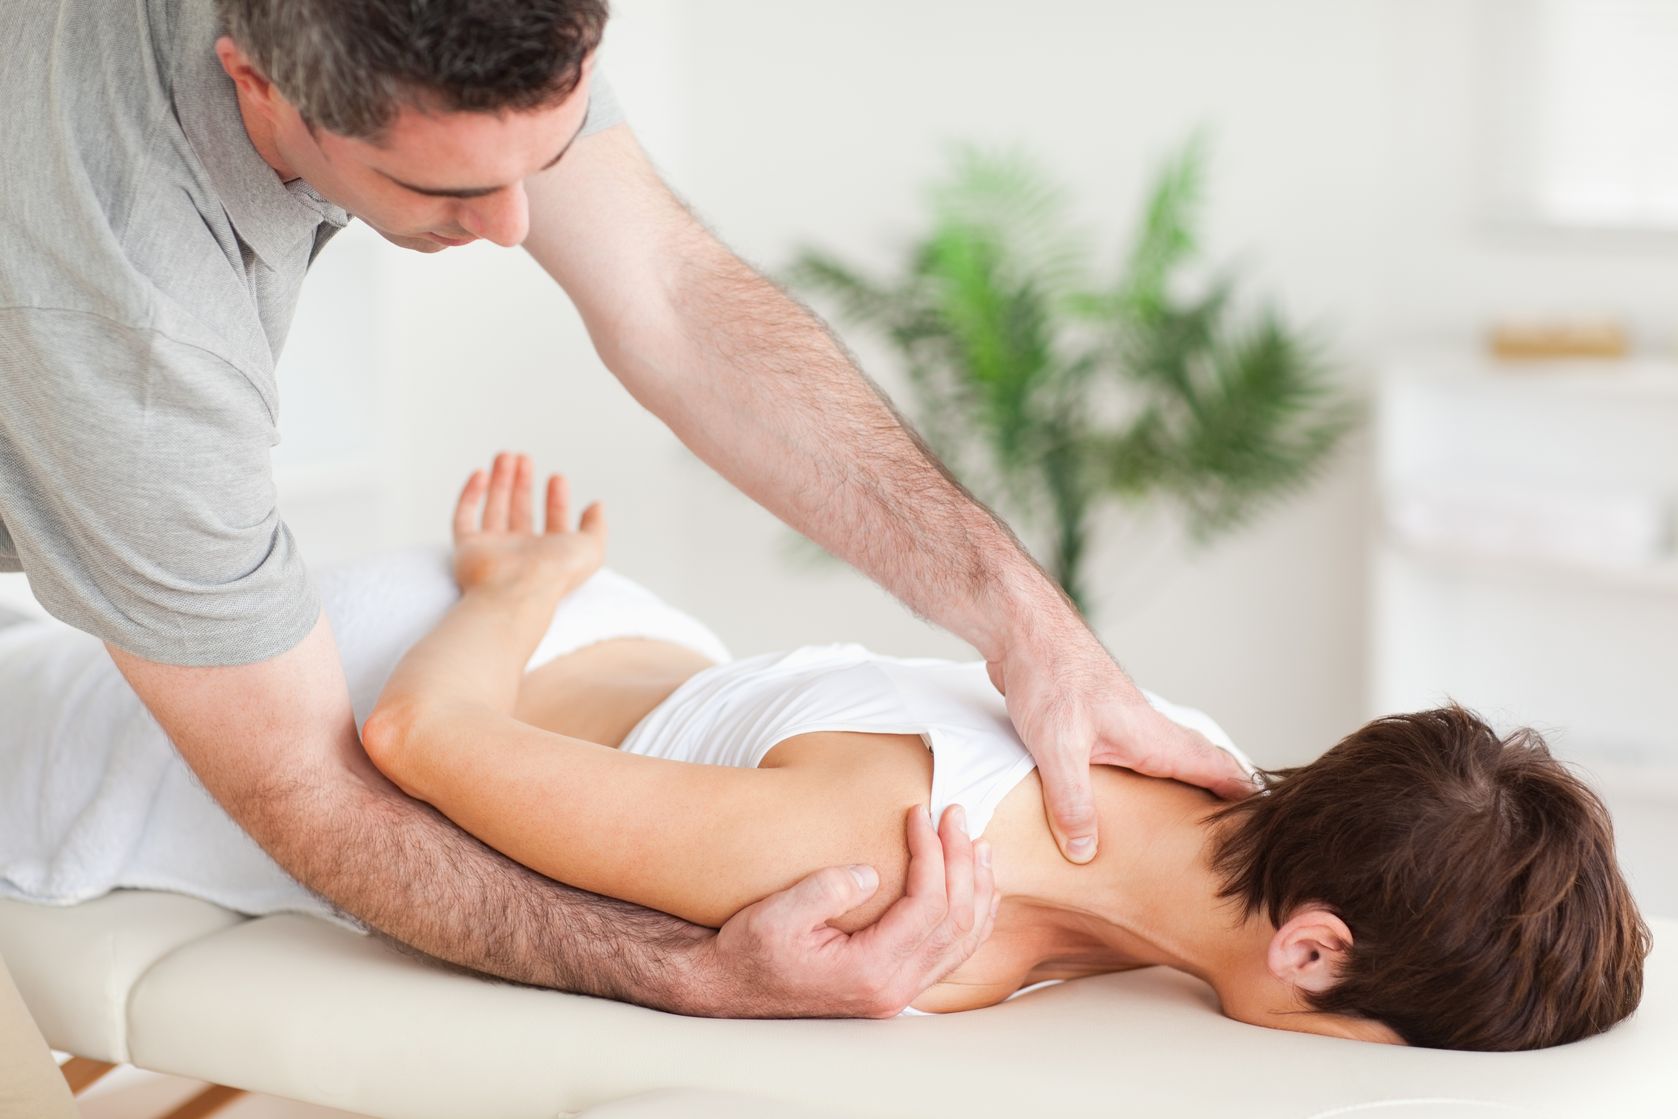 A Guide To Chiropractor - Profile - Digital Marketing & Onli